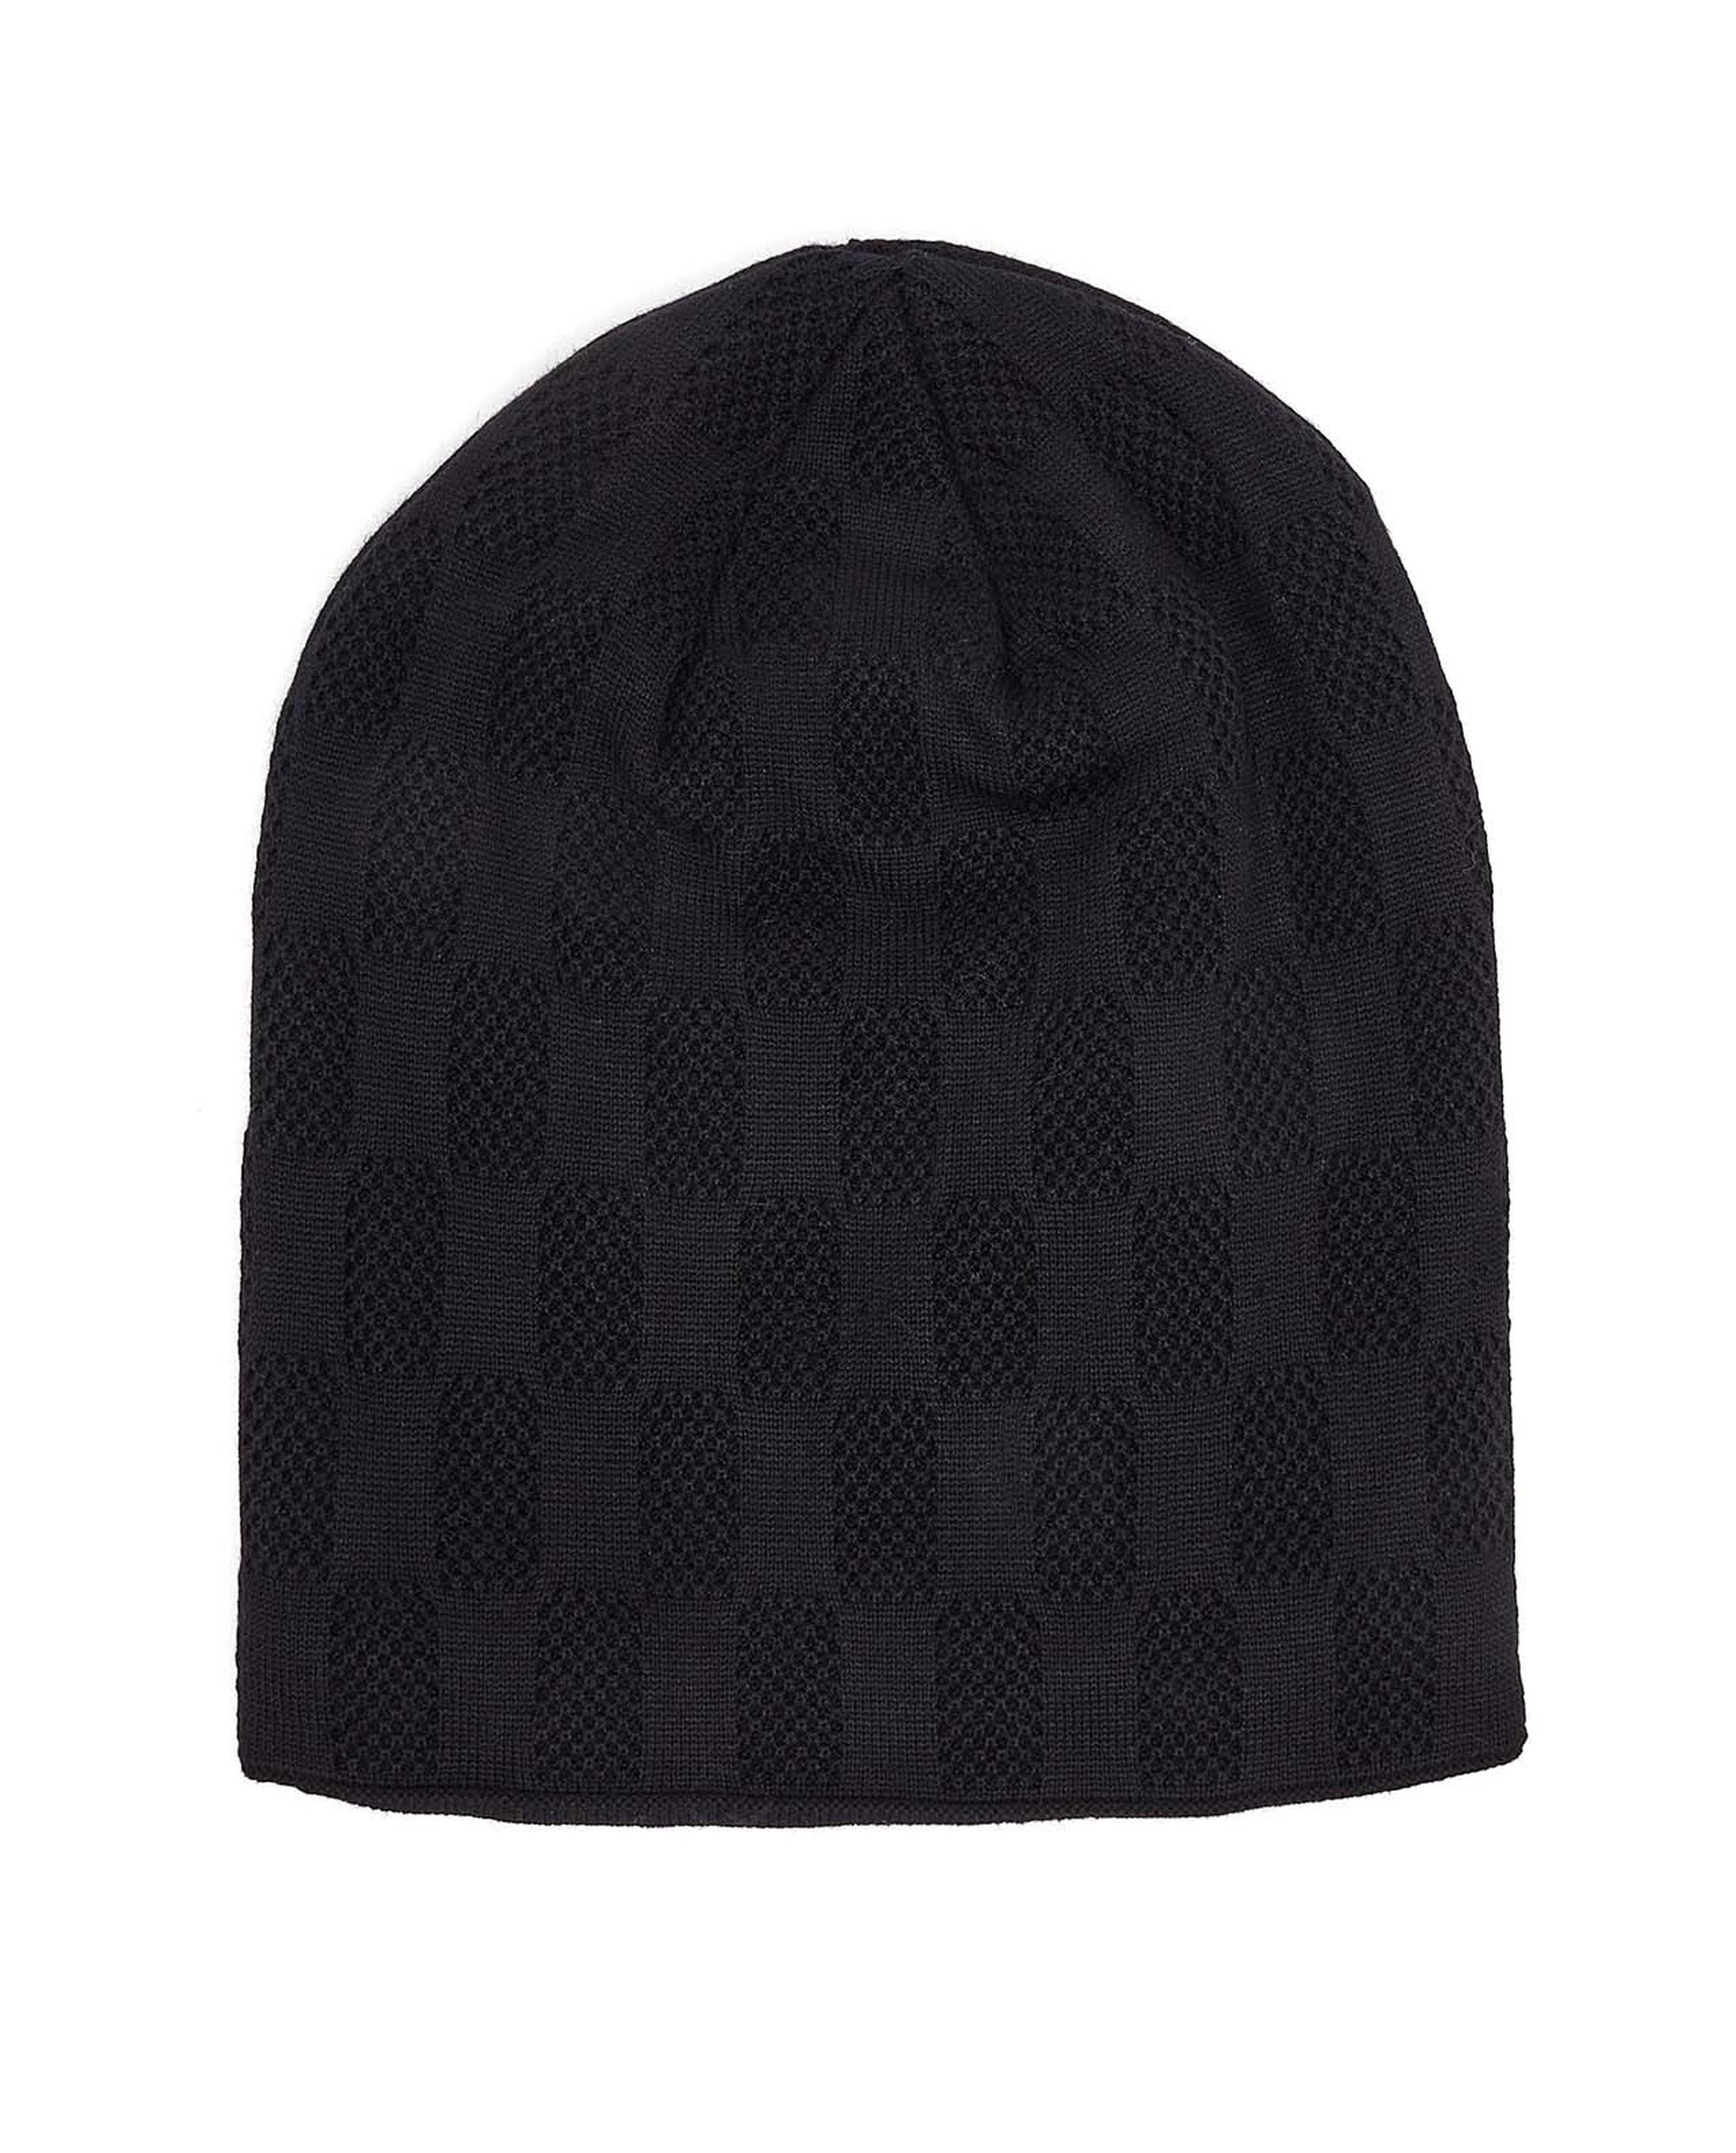 Self Patterned Beanie